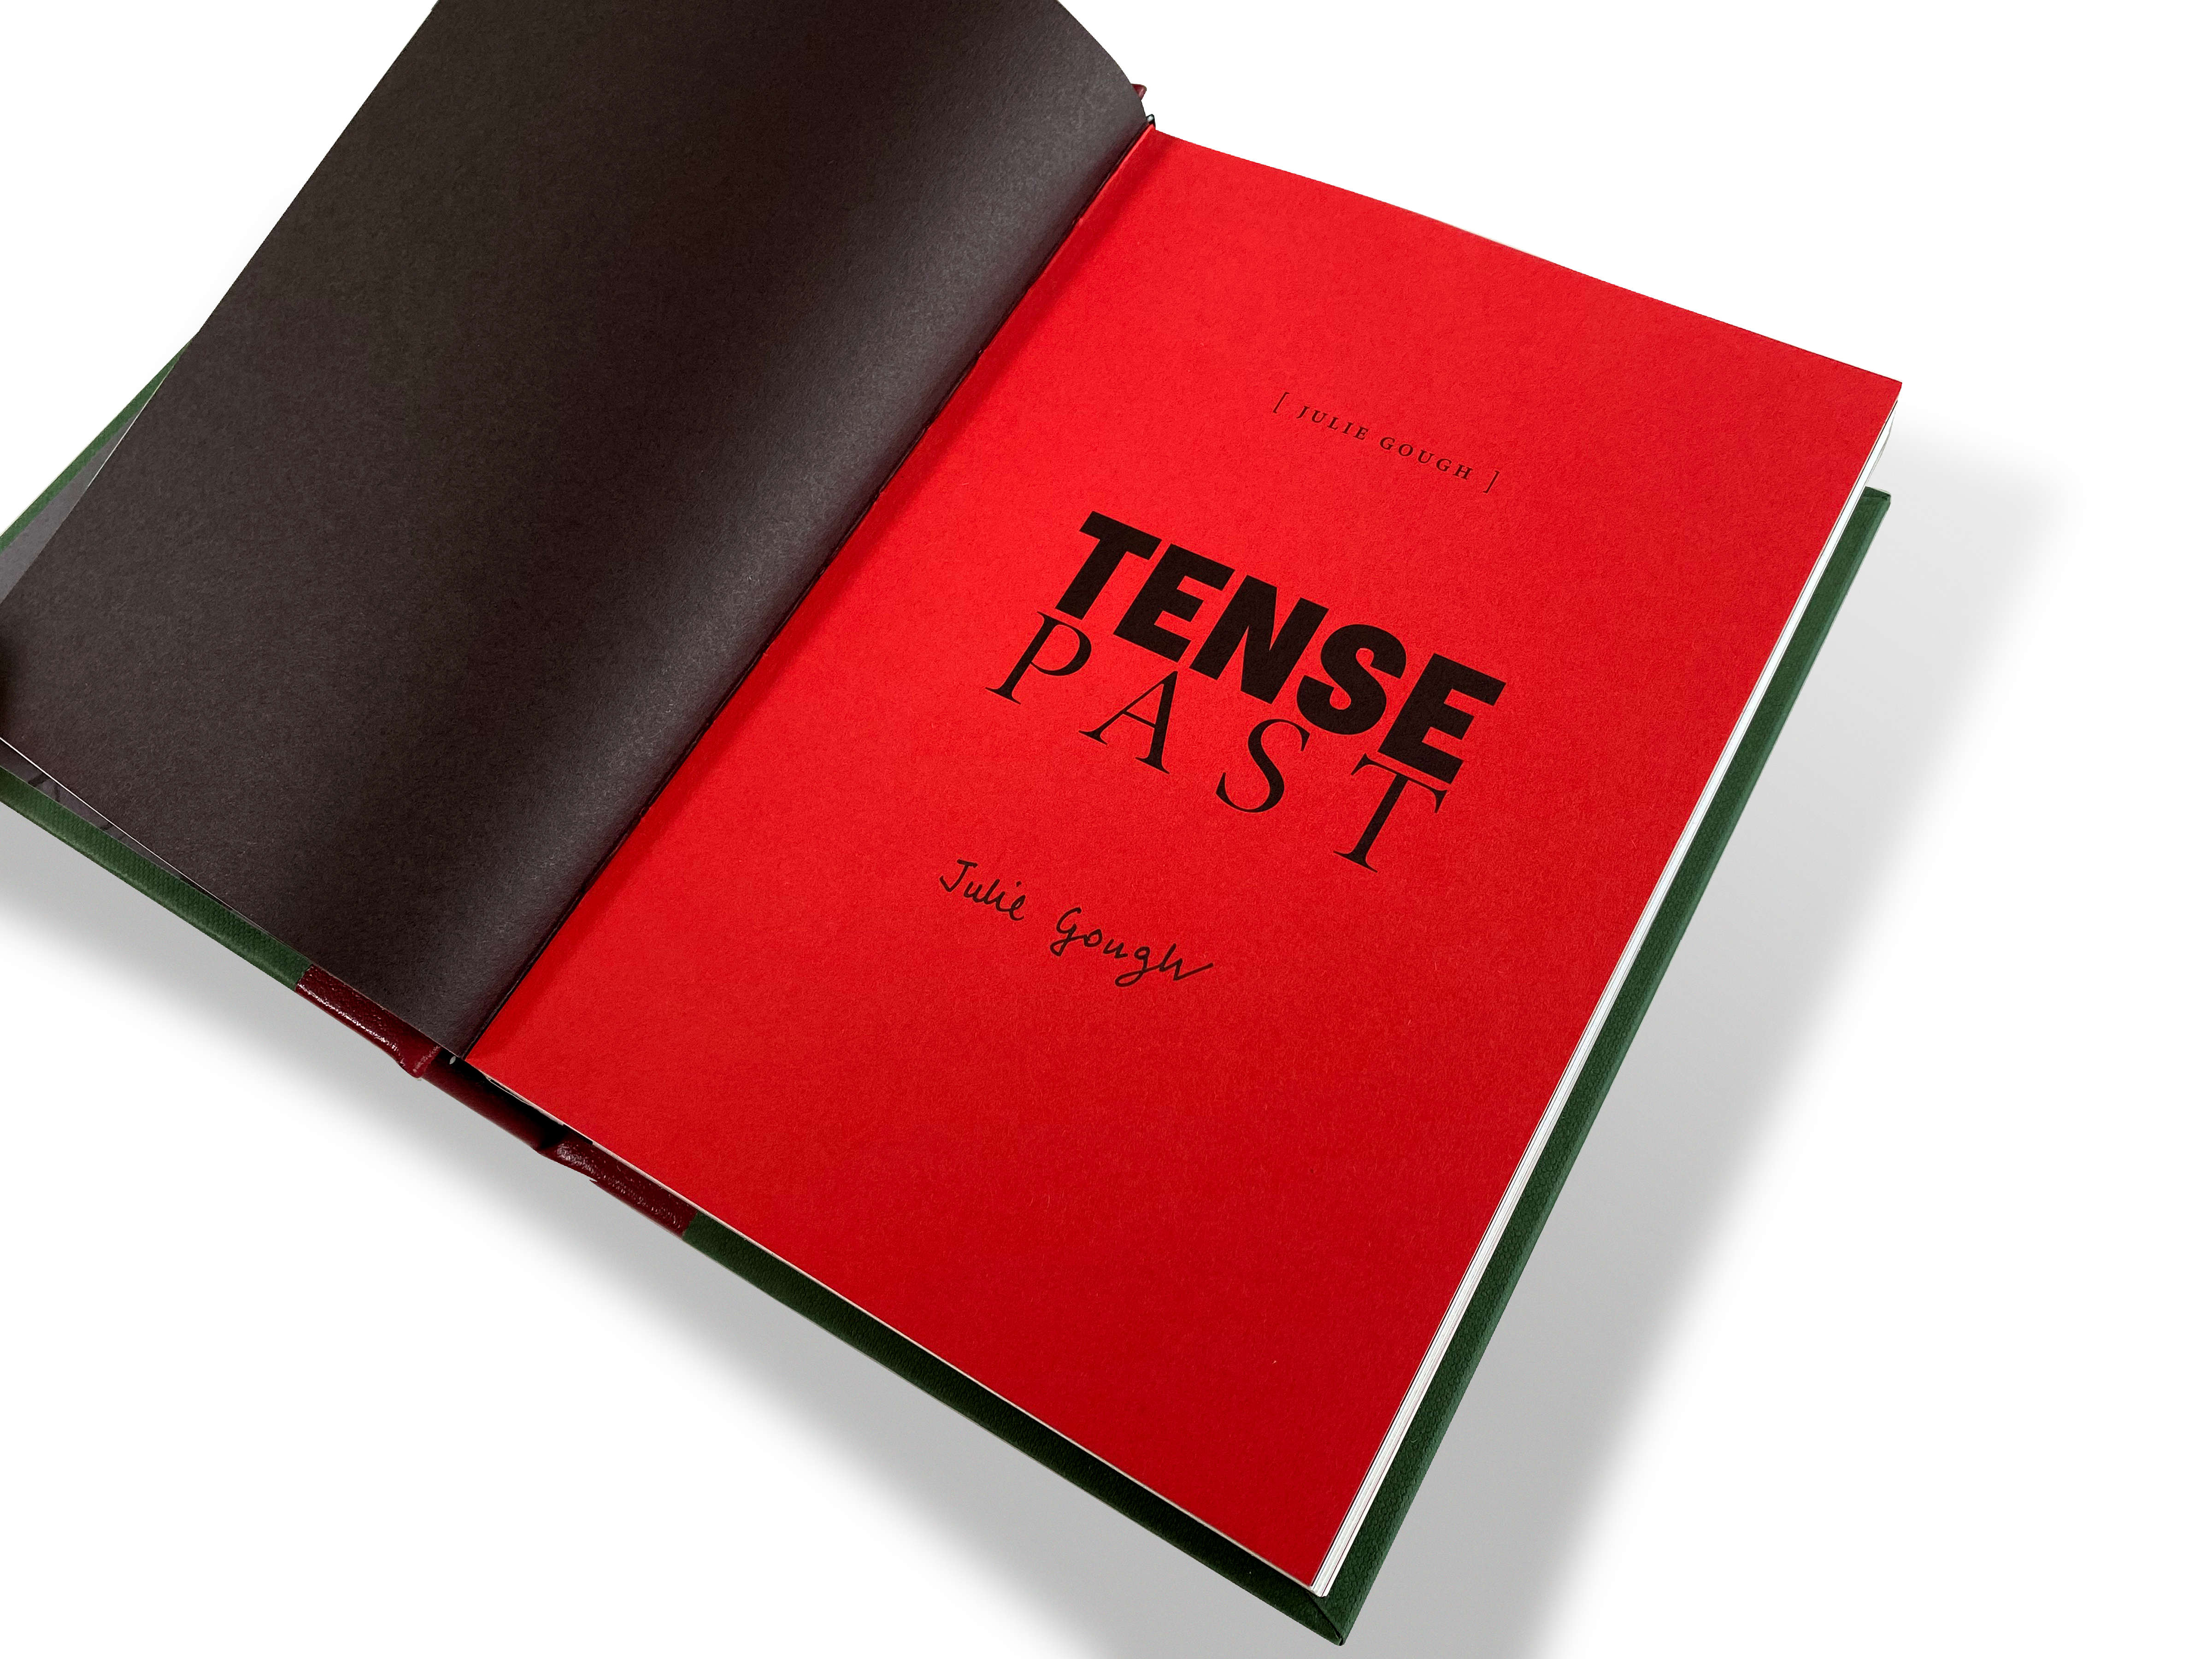 An image of the TENSE PAST book open at the Title Page showing Julie Gough’s signature.